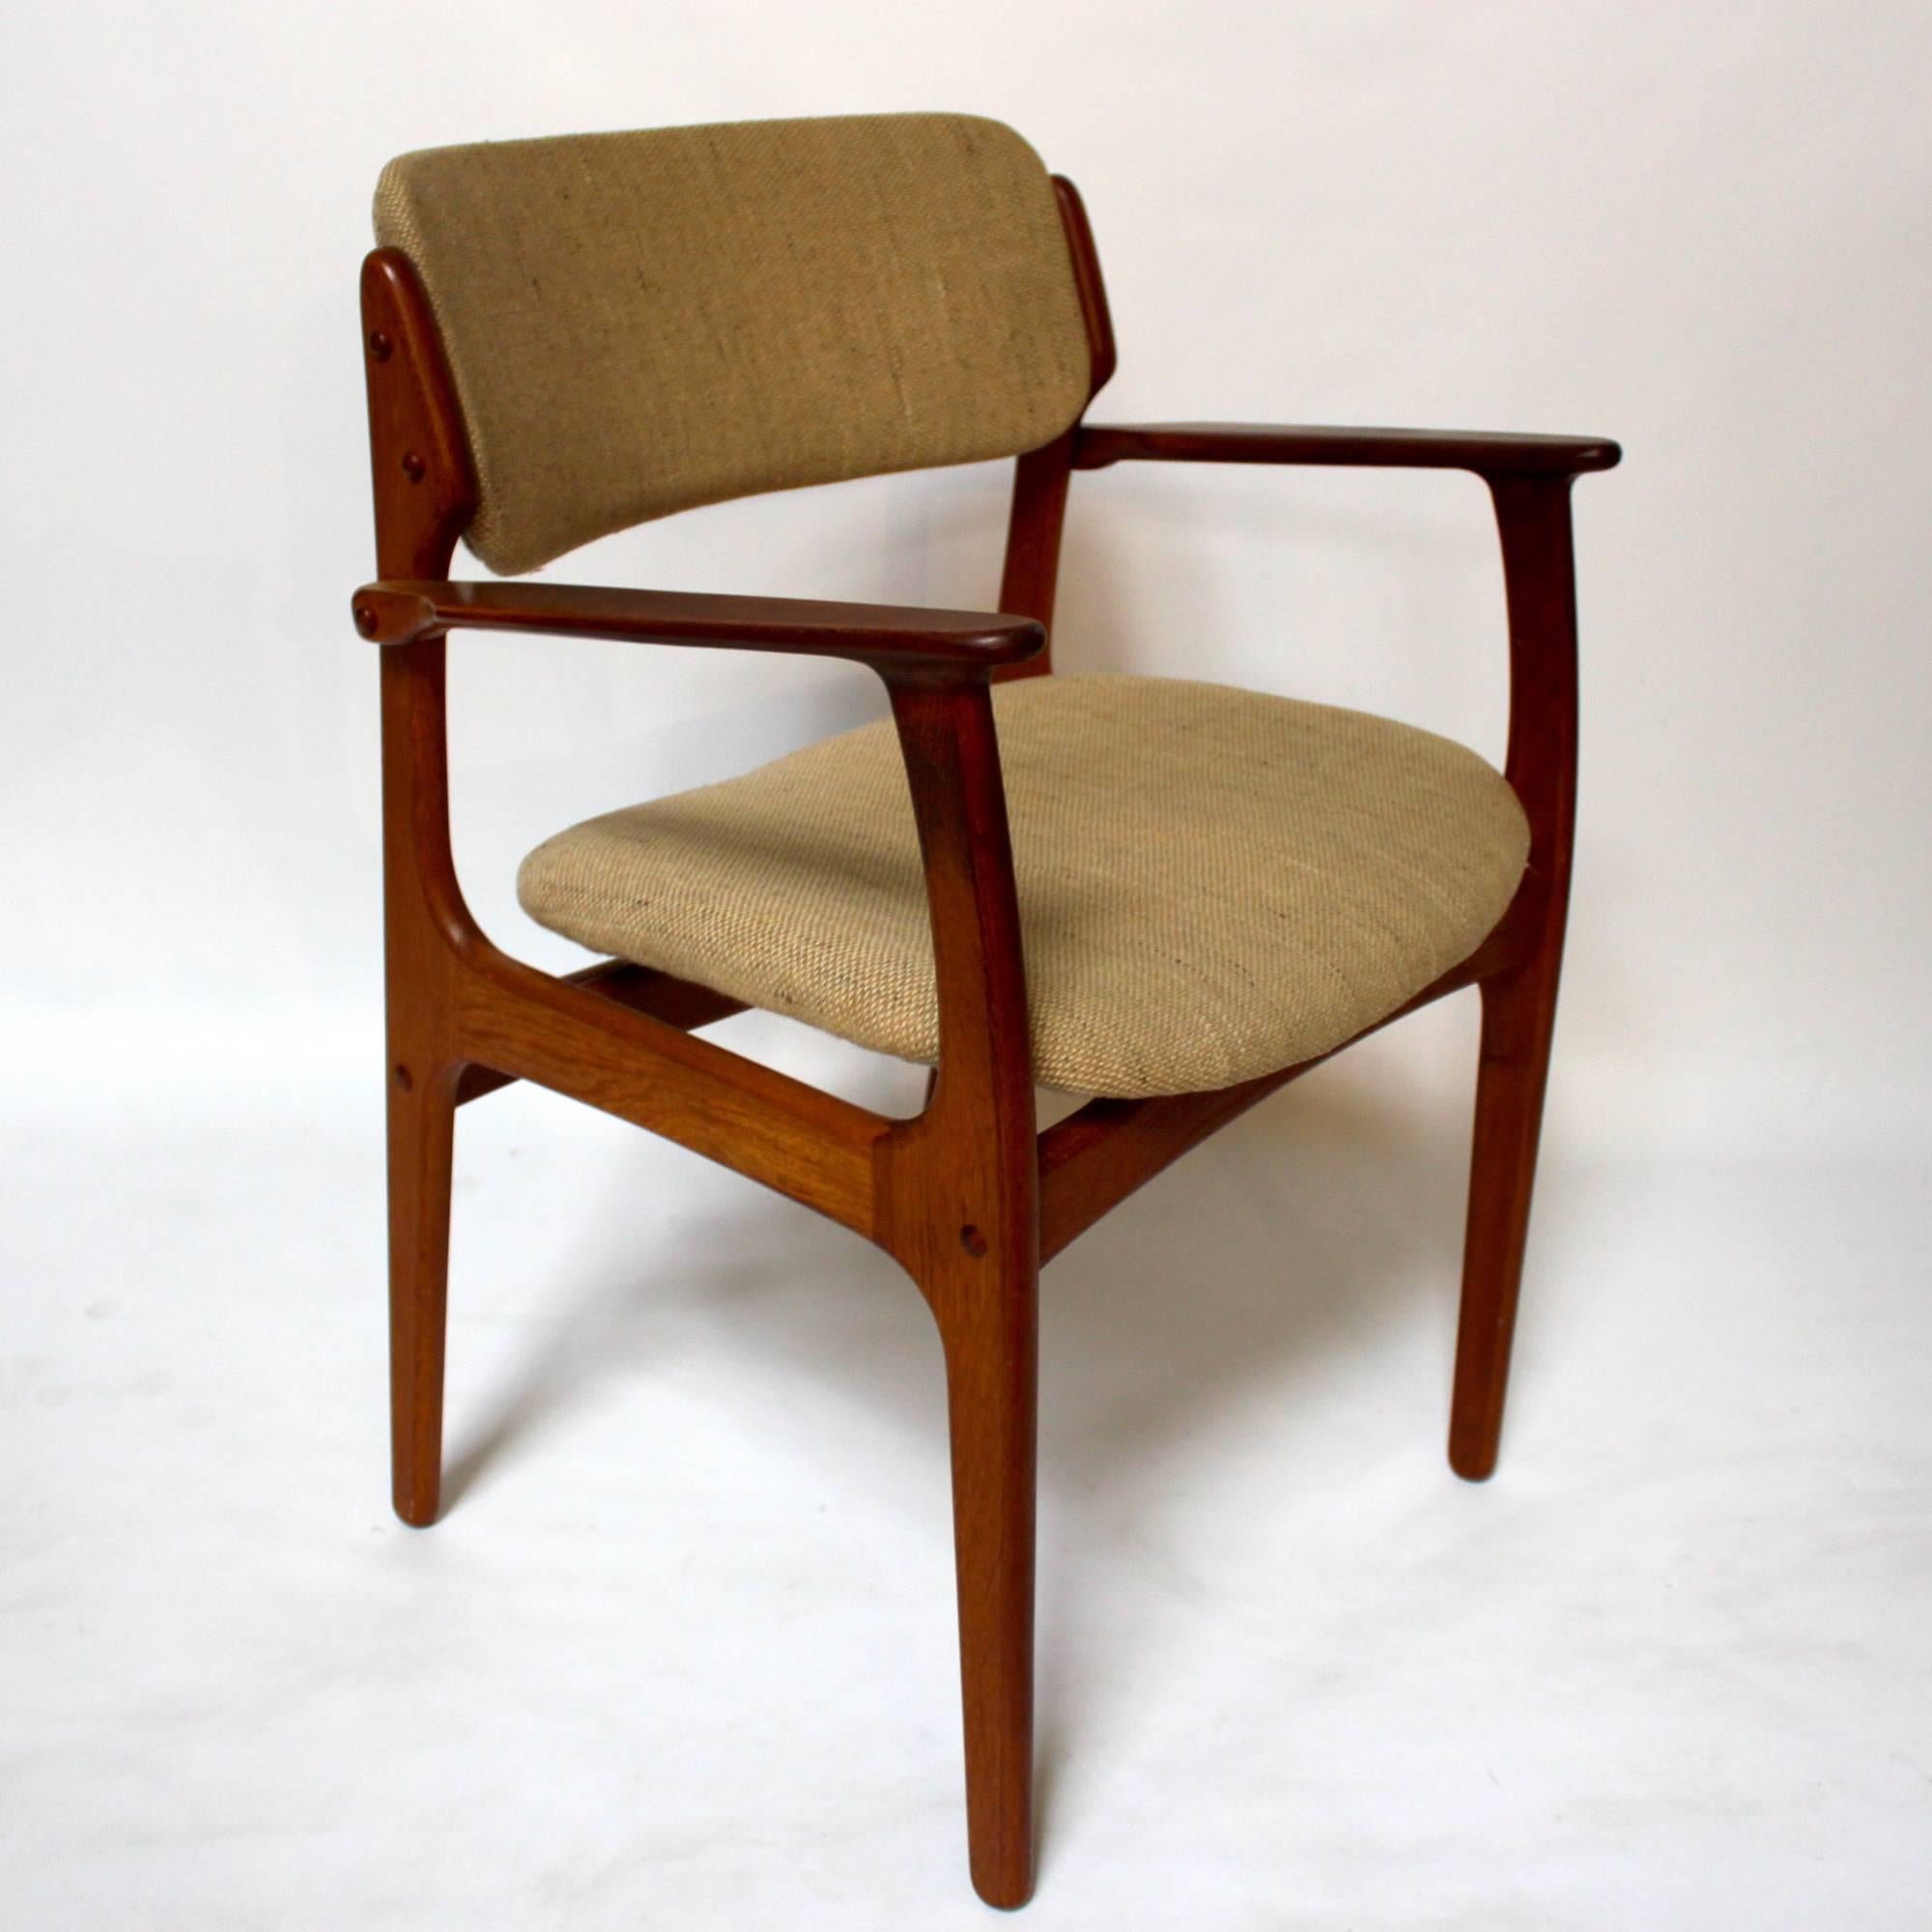 Pair of Danish Modern Model OD-49 Teak Armchairs by Erik Buch In Good Condition For Sale In Sacramento, CA